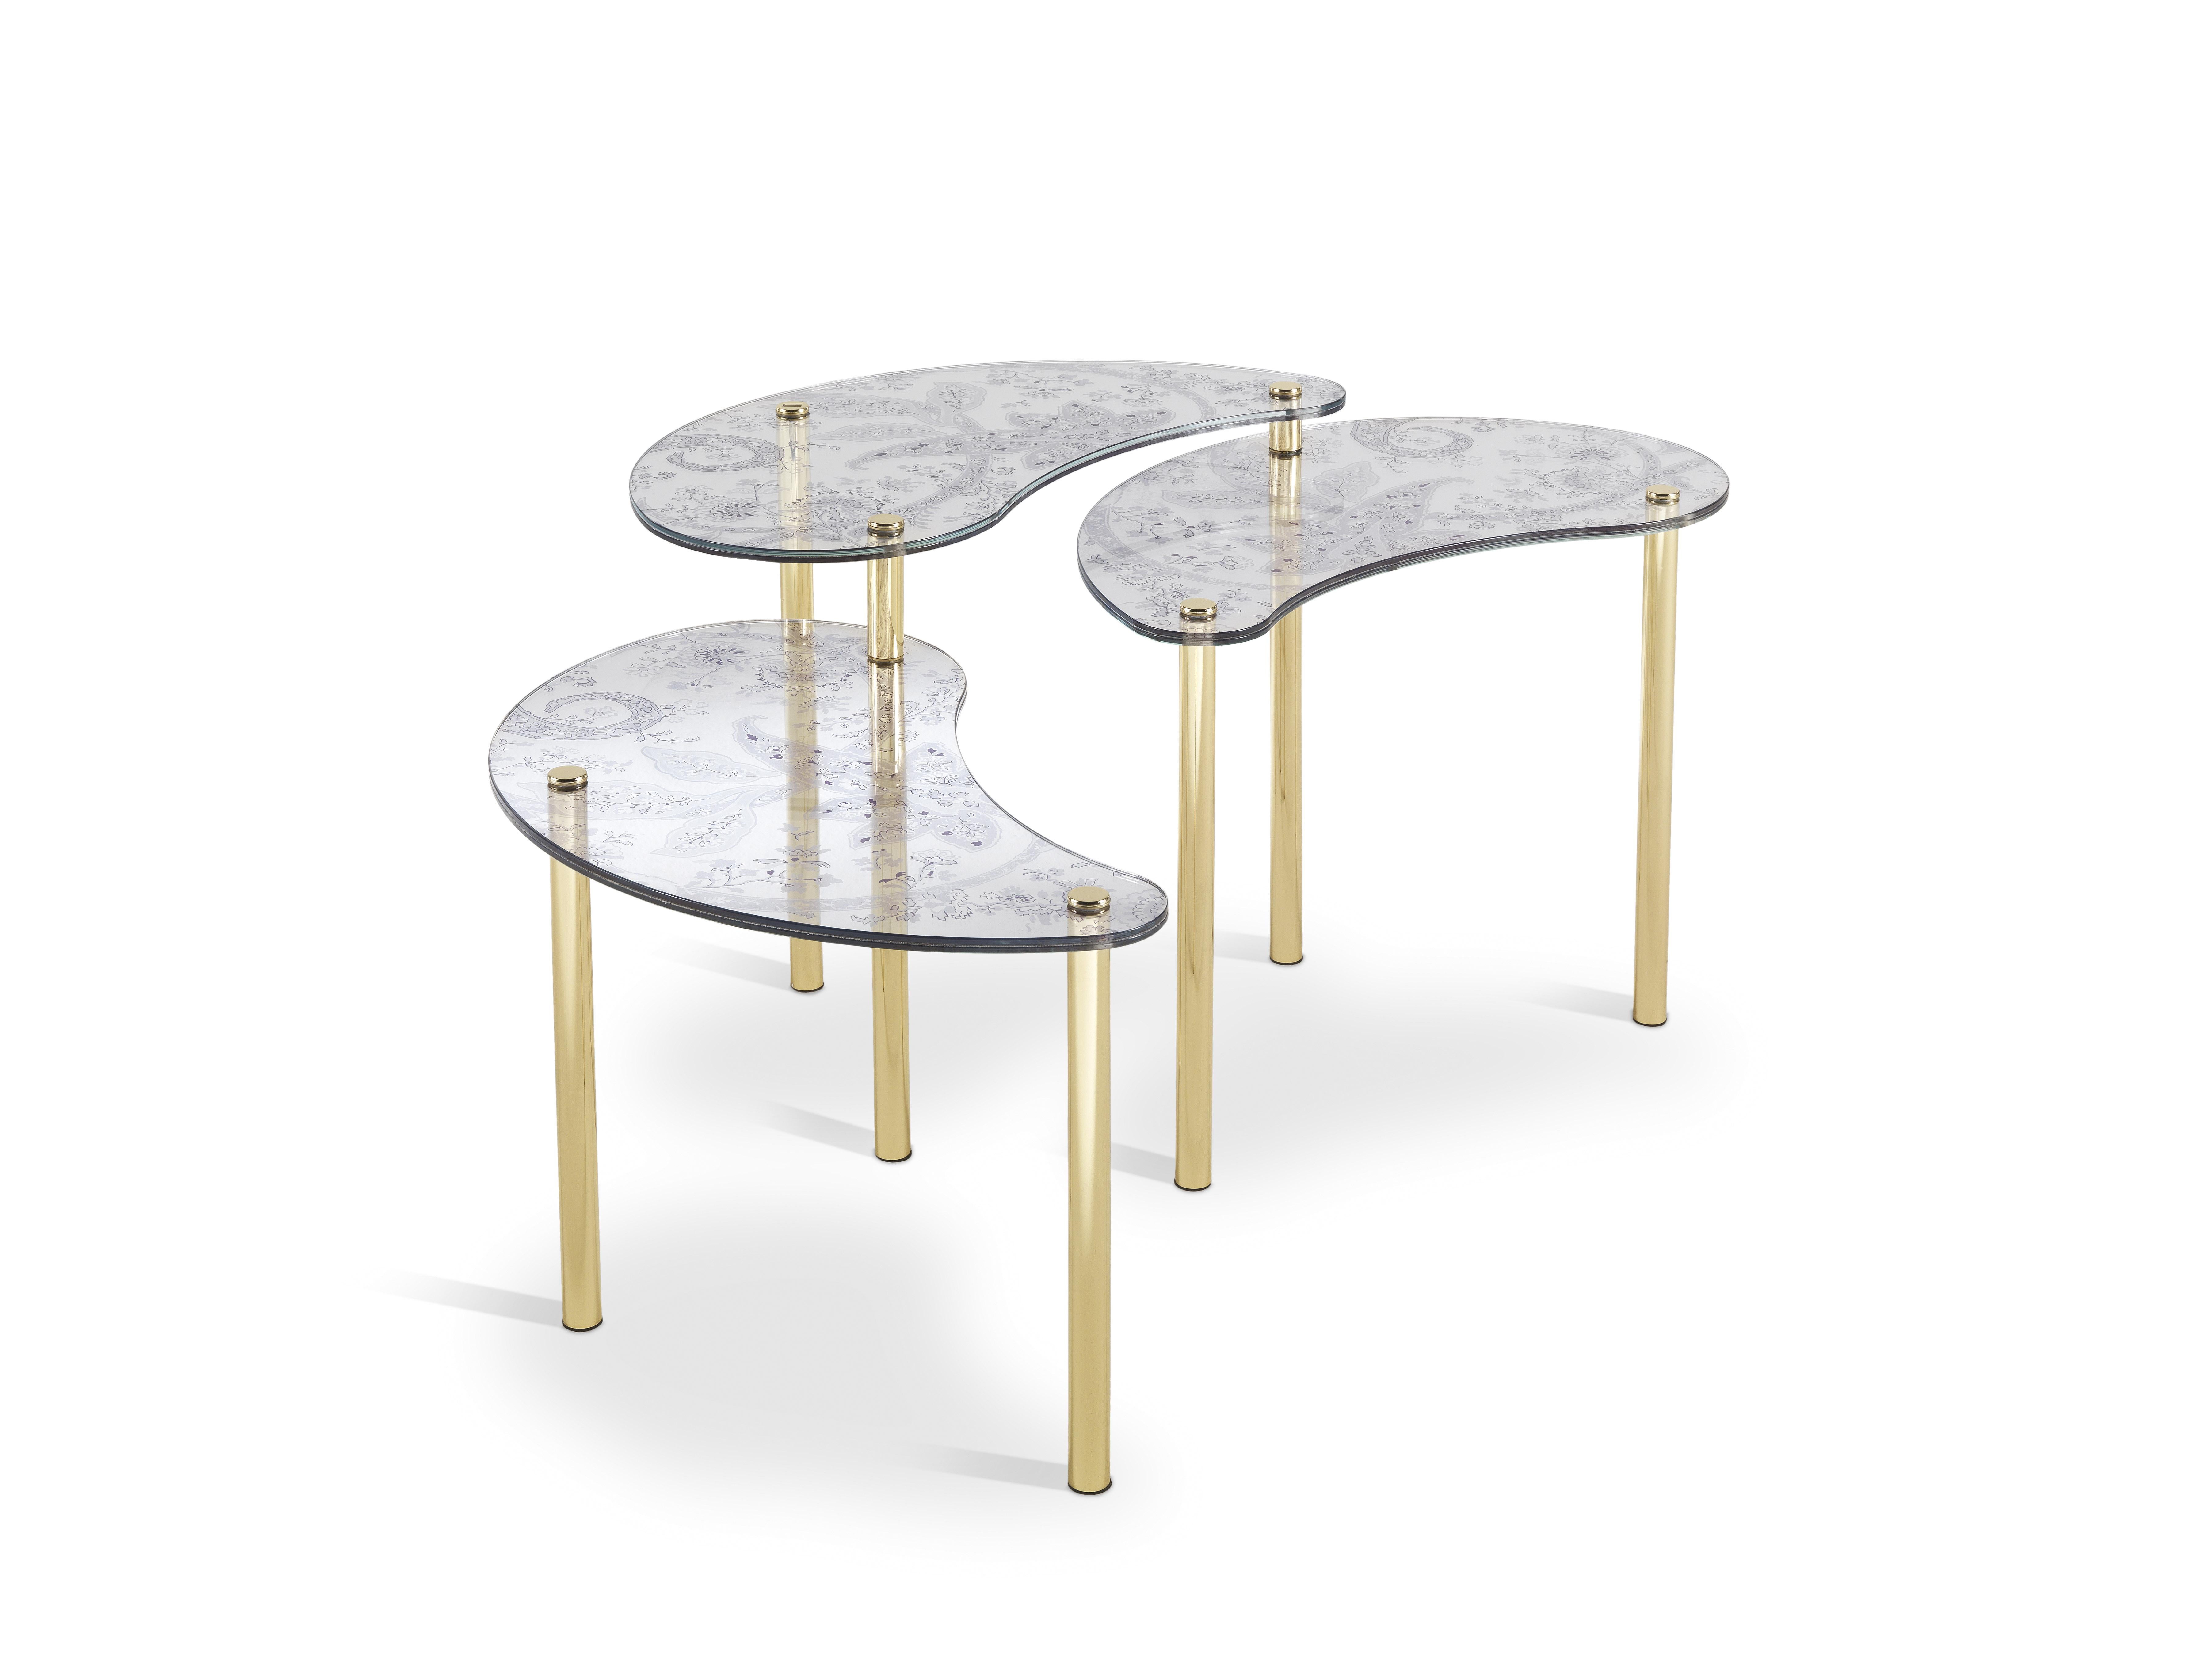 A subtle play of shapes and transparencies, in a small table with a refined composition, consisting of three tops in extra-clear tempered glass, of different heights, each one with a symbolic drop shape. A direct reference to the paisley, the